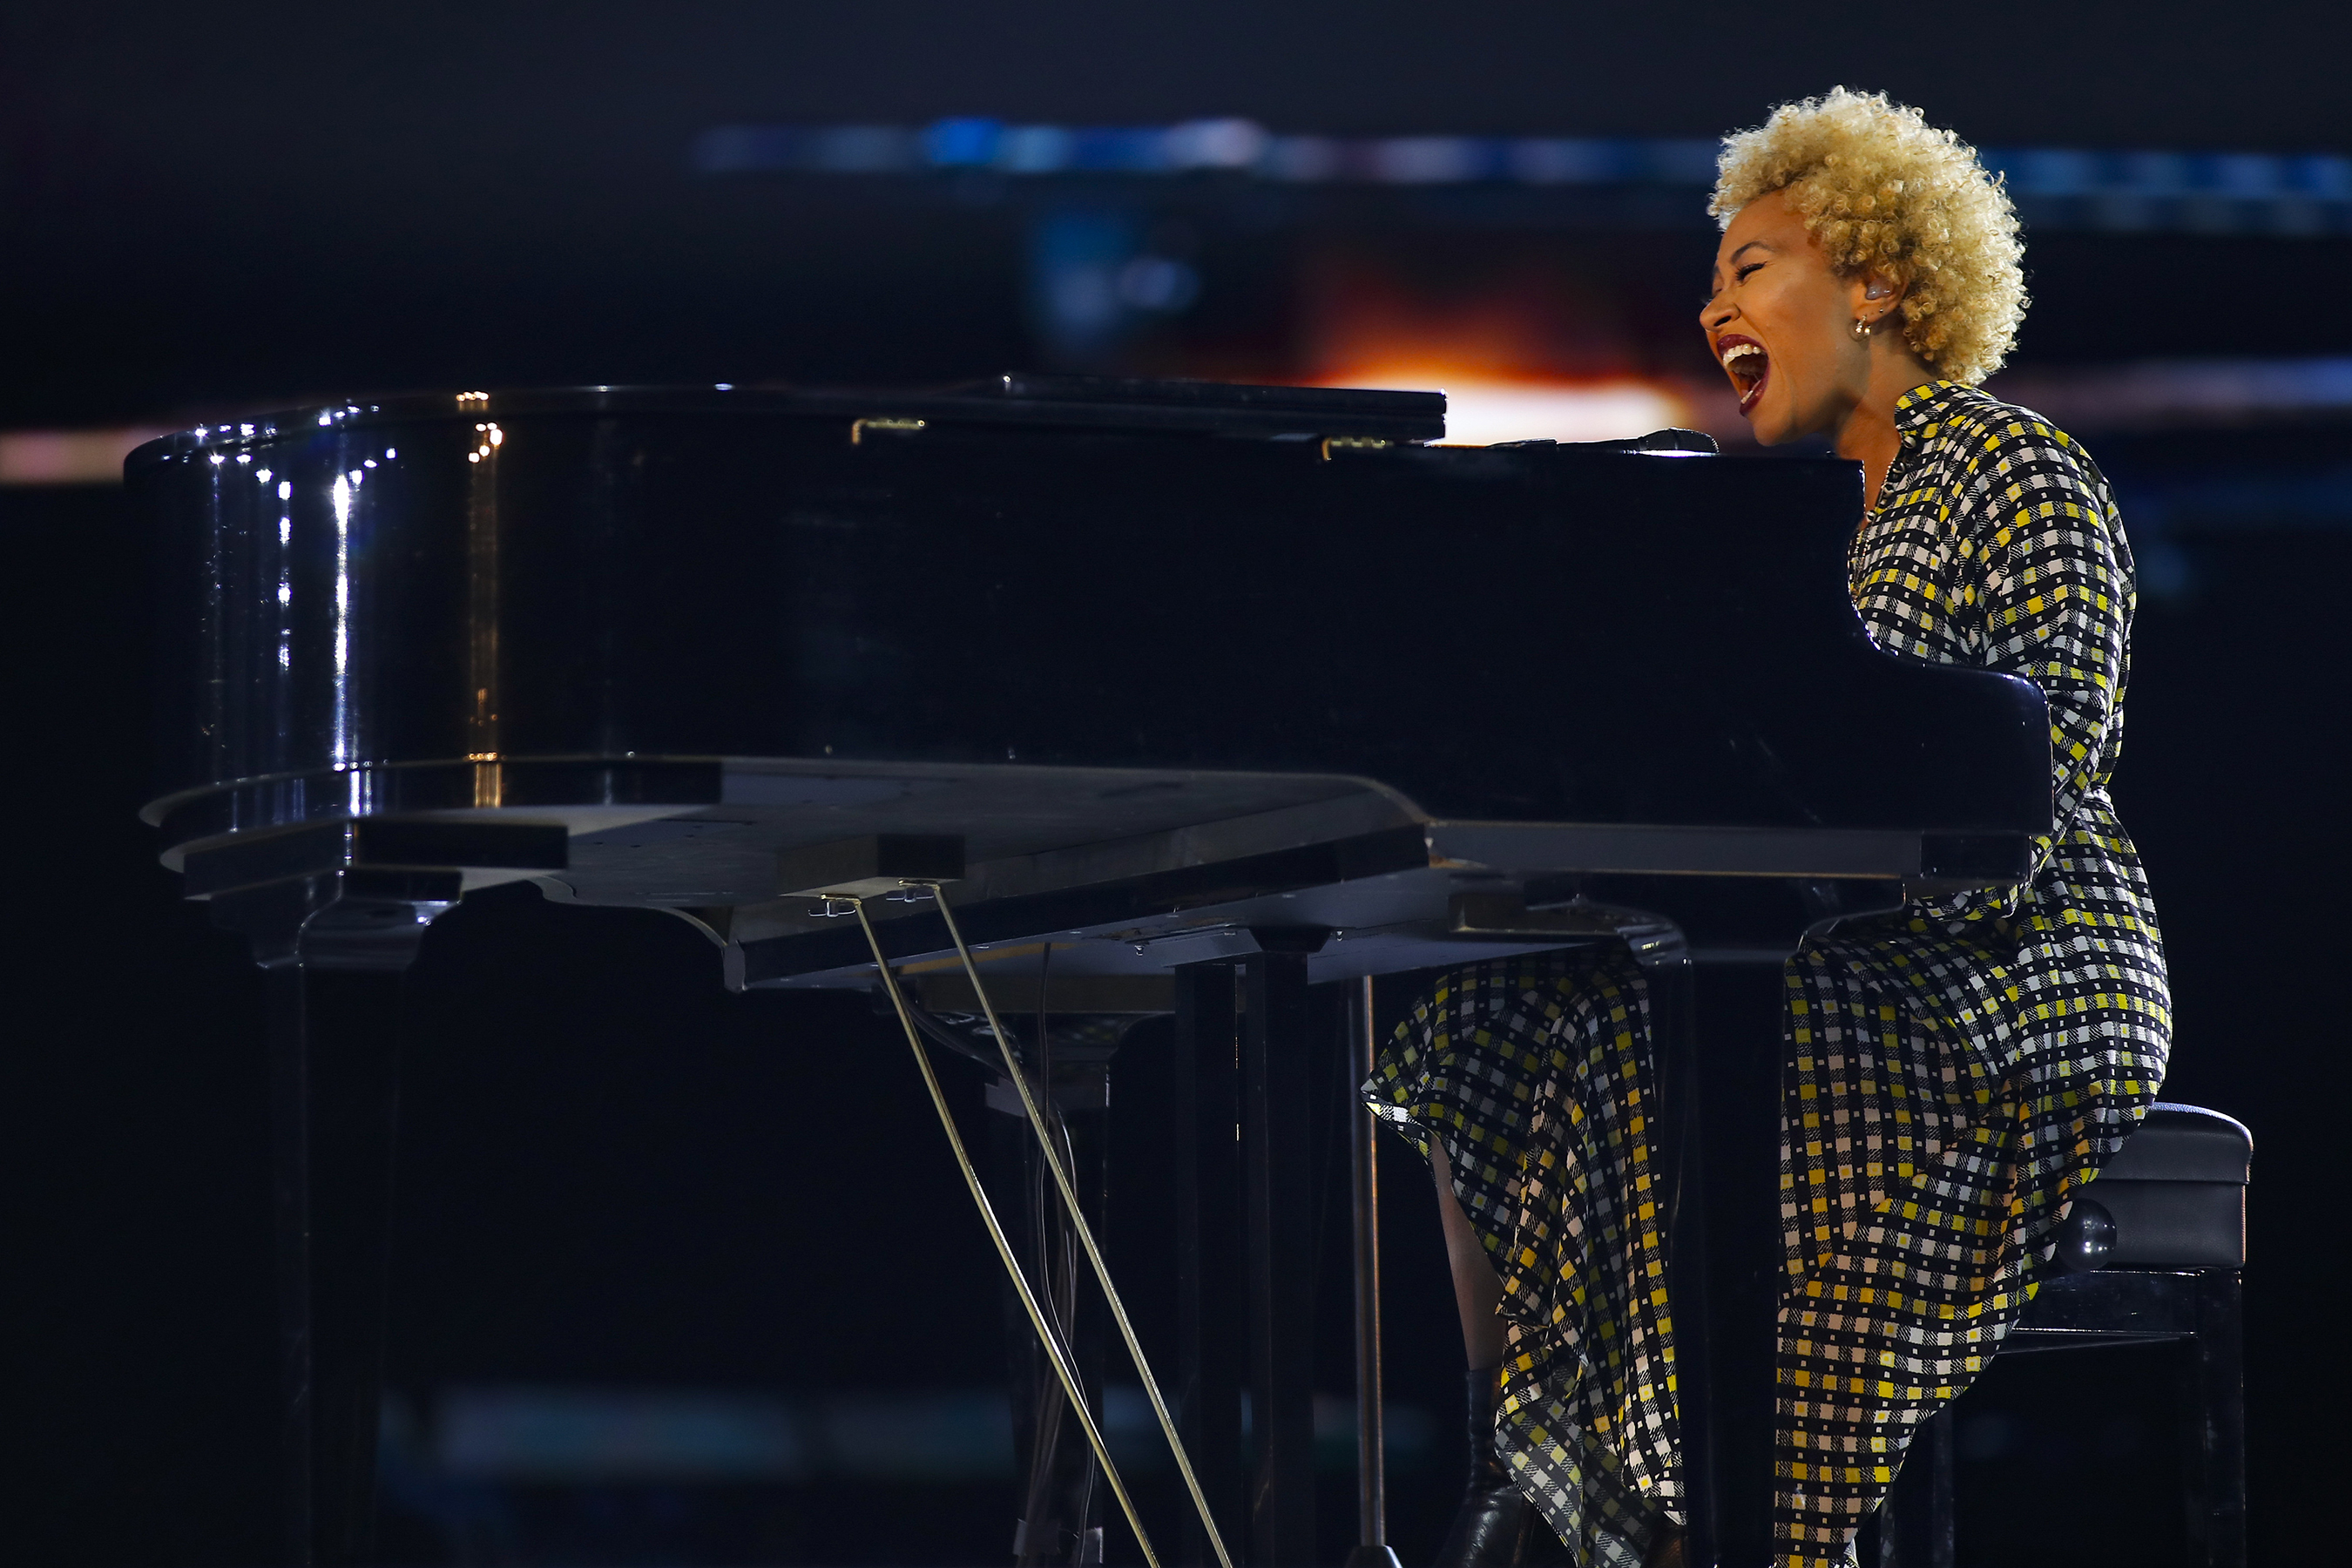 British singer-songwriter Emeli Sand performed her song, "Hope," inspired by Dr. Martin Luther King Jr. at the inaugural Beloved Benefit at Mercedes-Benz Stadium on Thursday, March 21, 2019, in Atlanta.